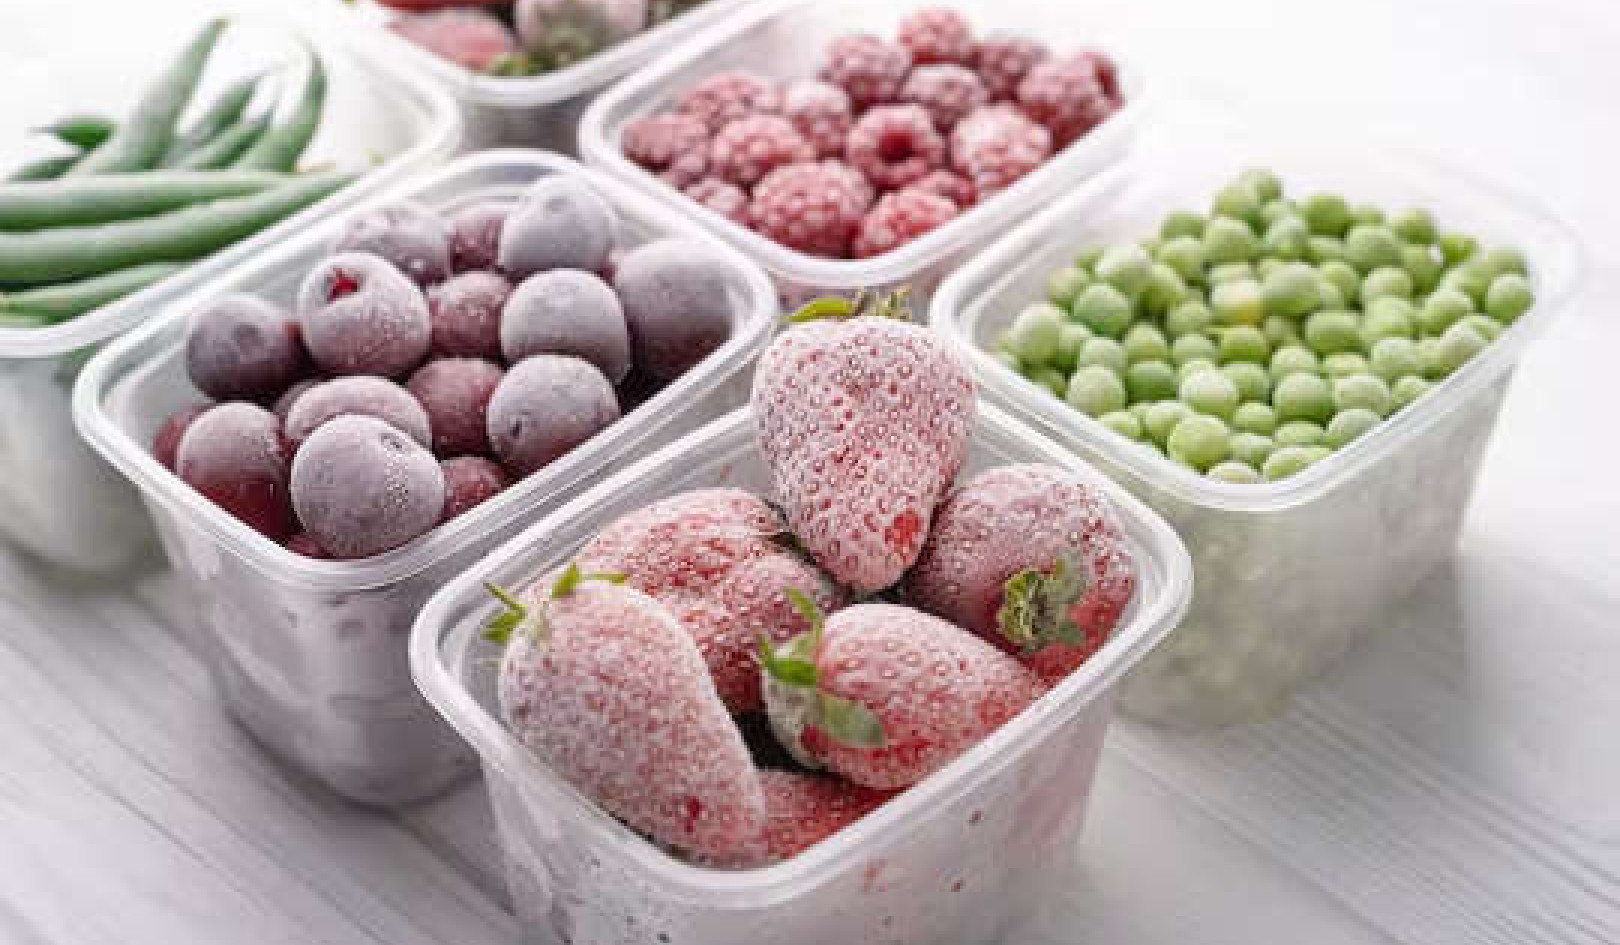 Frozen and Canned Foods Can Be More Nutritious than Fresh Produce